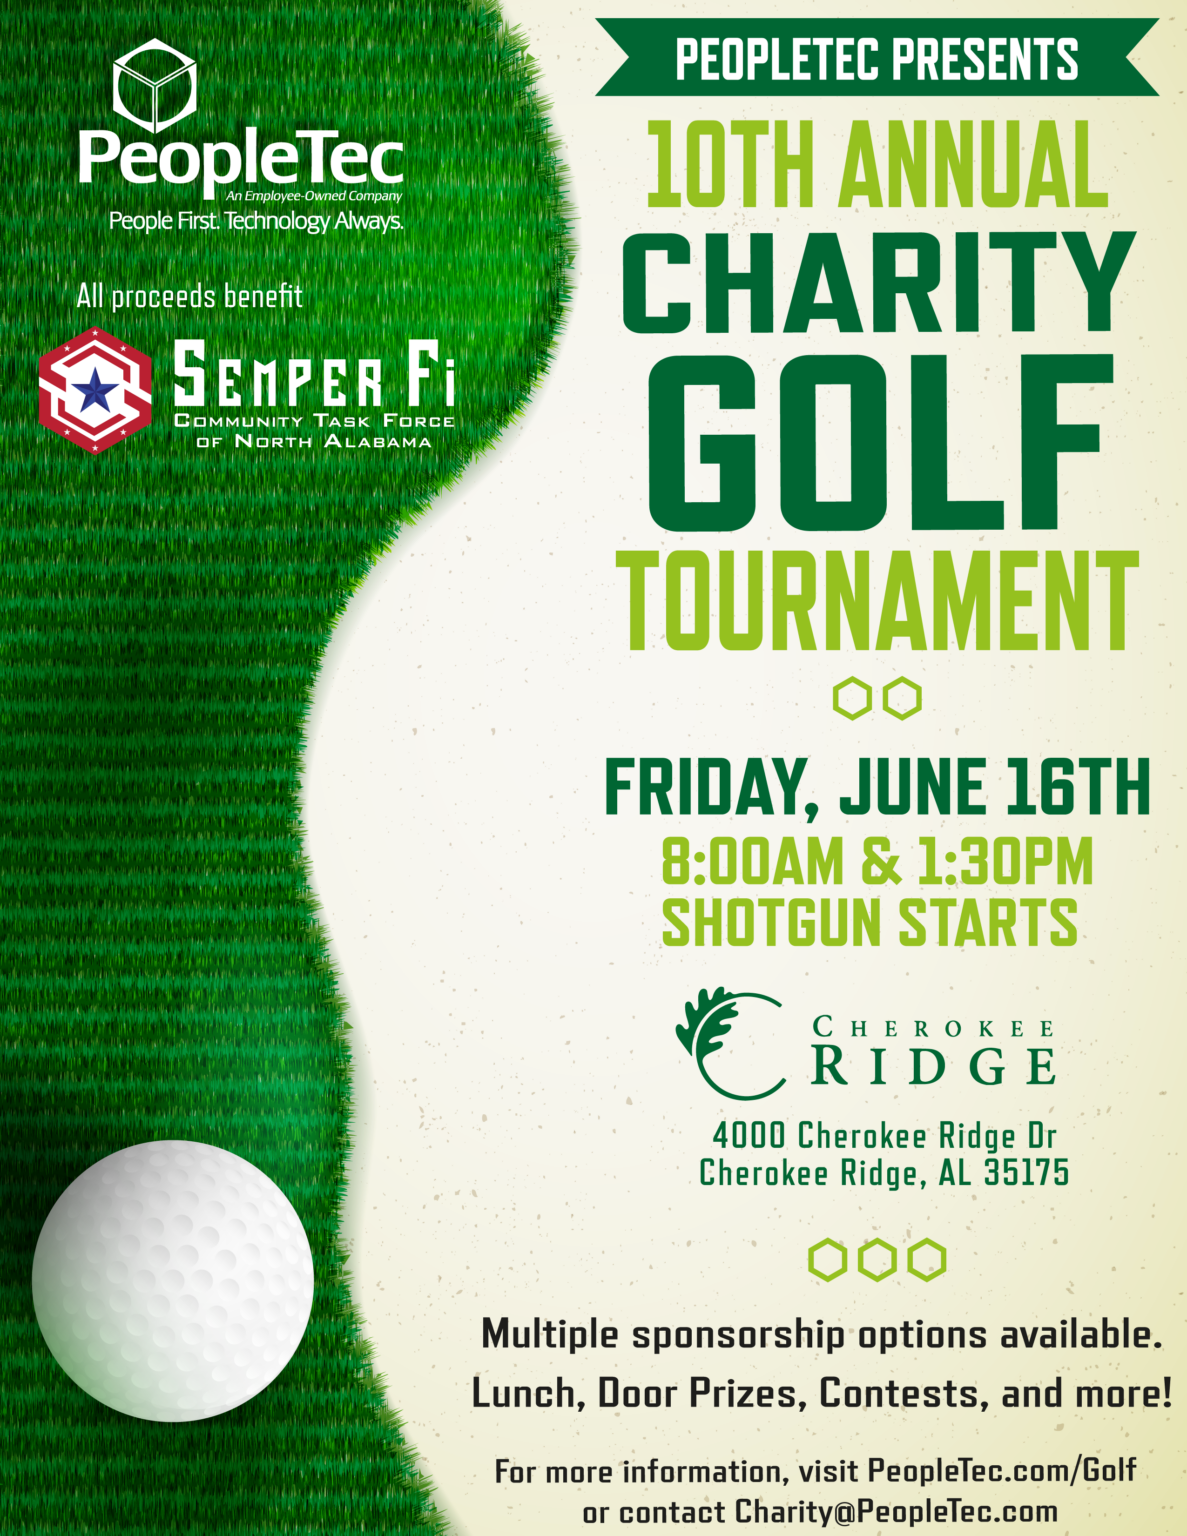 PeopleTec 10th annual charity golf tournament flyer